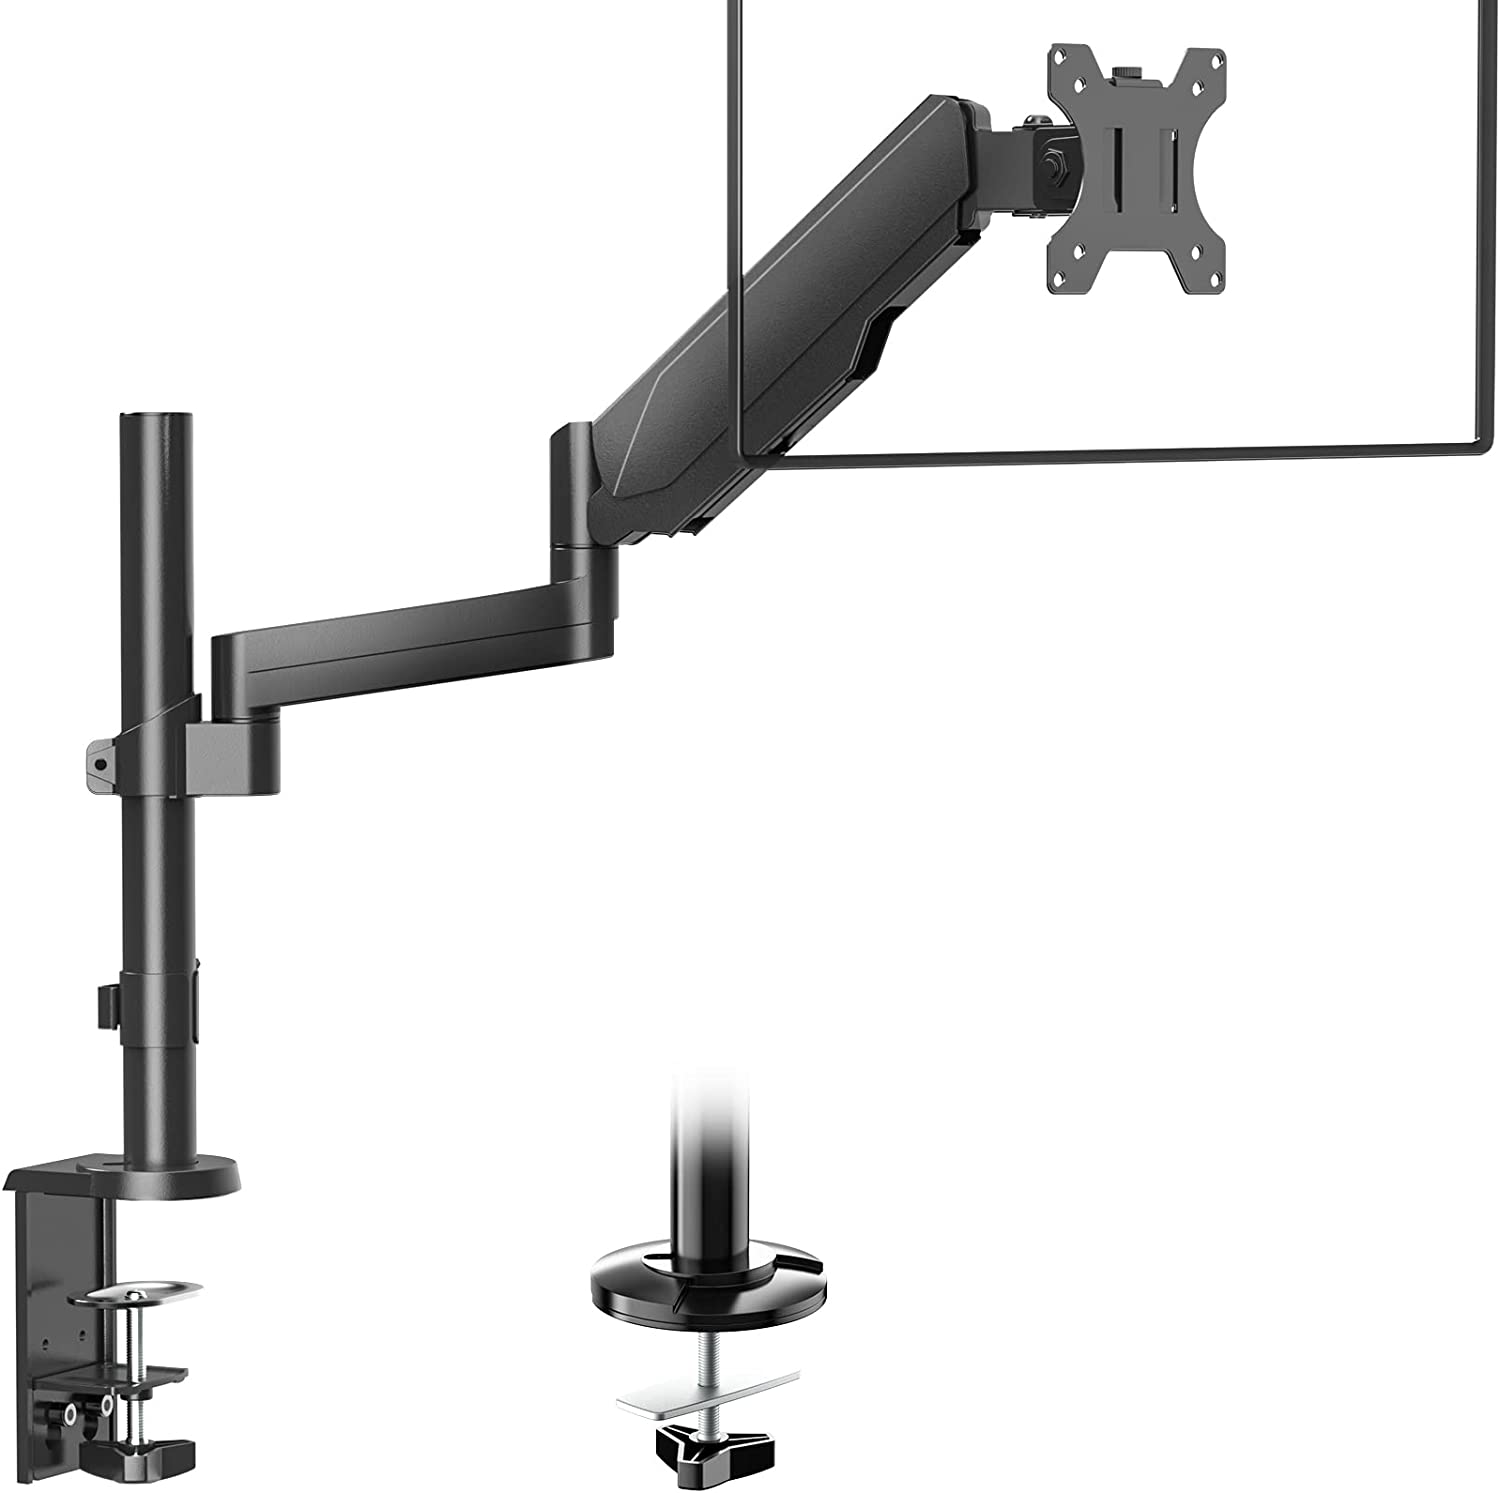 Wali Premium Single Monitor Desk Mount w/ Fully Adjustable Gas Spring (for 17-32" monitor, Black) $19.85 + Free Shipping w/ Prime or on $25+